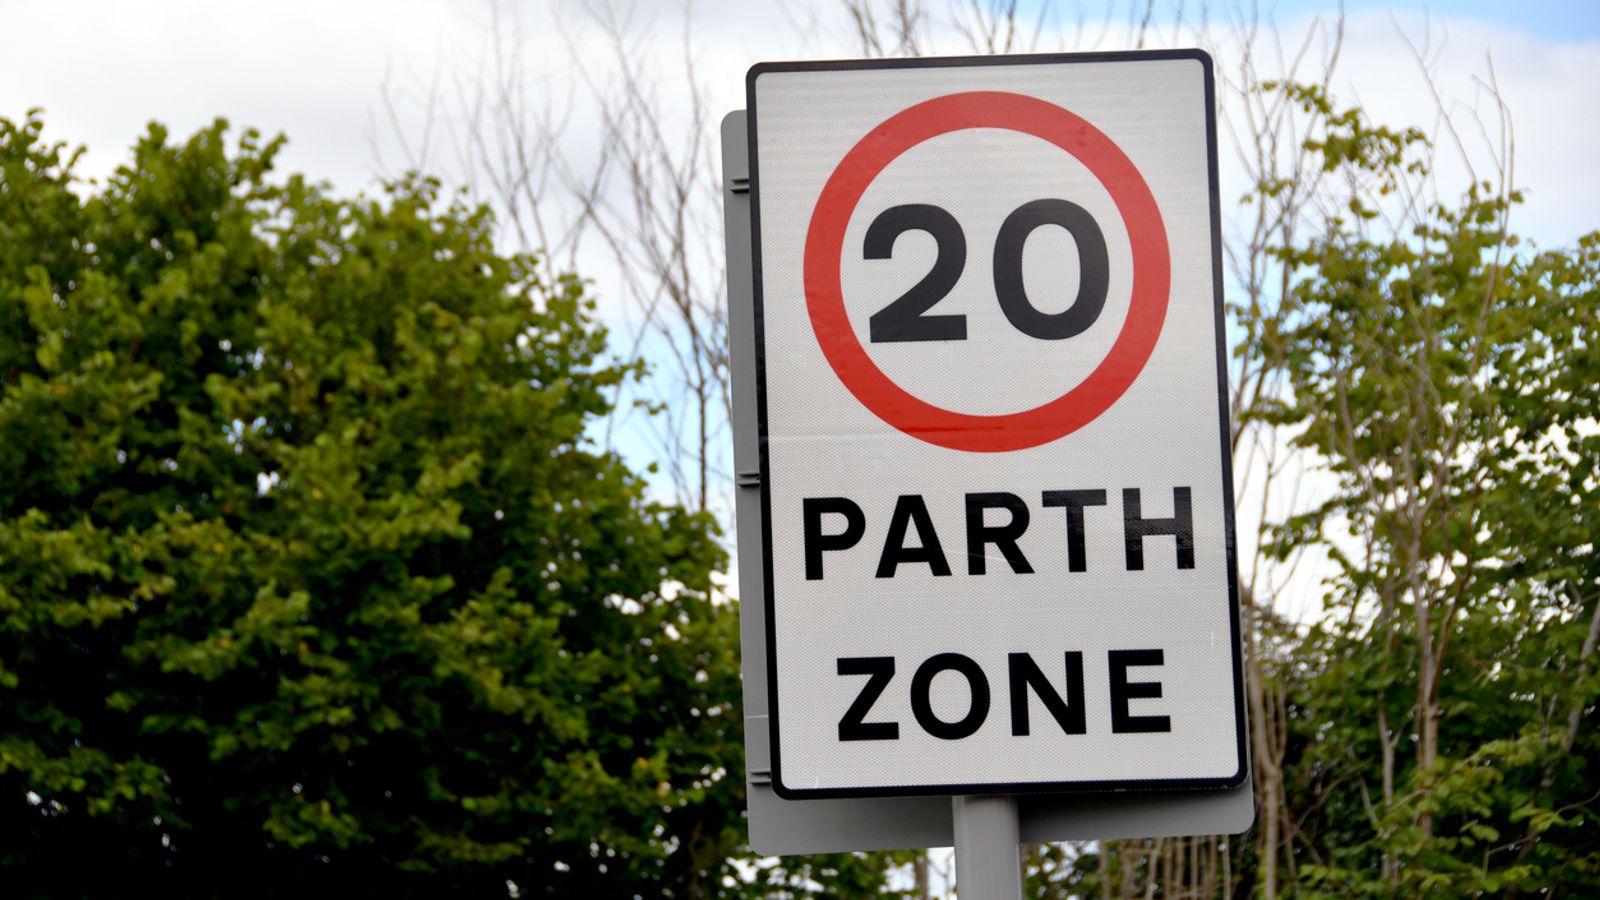 Wales: Over half of journeys break default 20mph limit in built-up areas, new report says